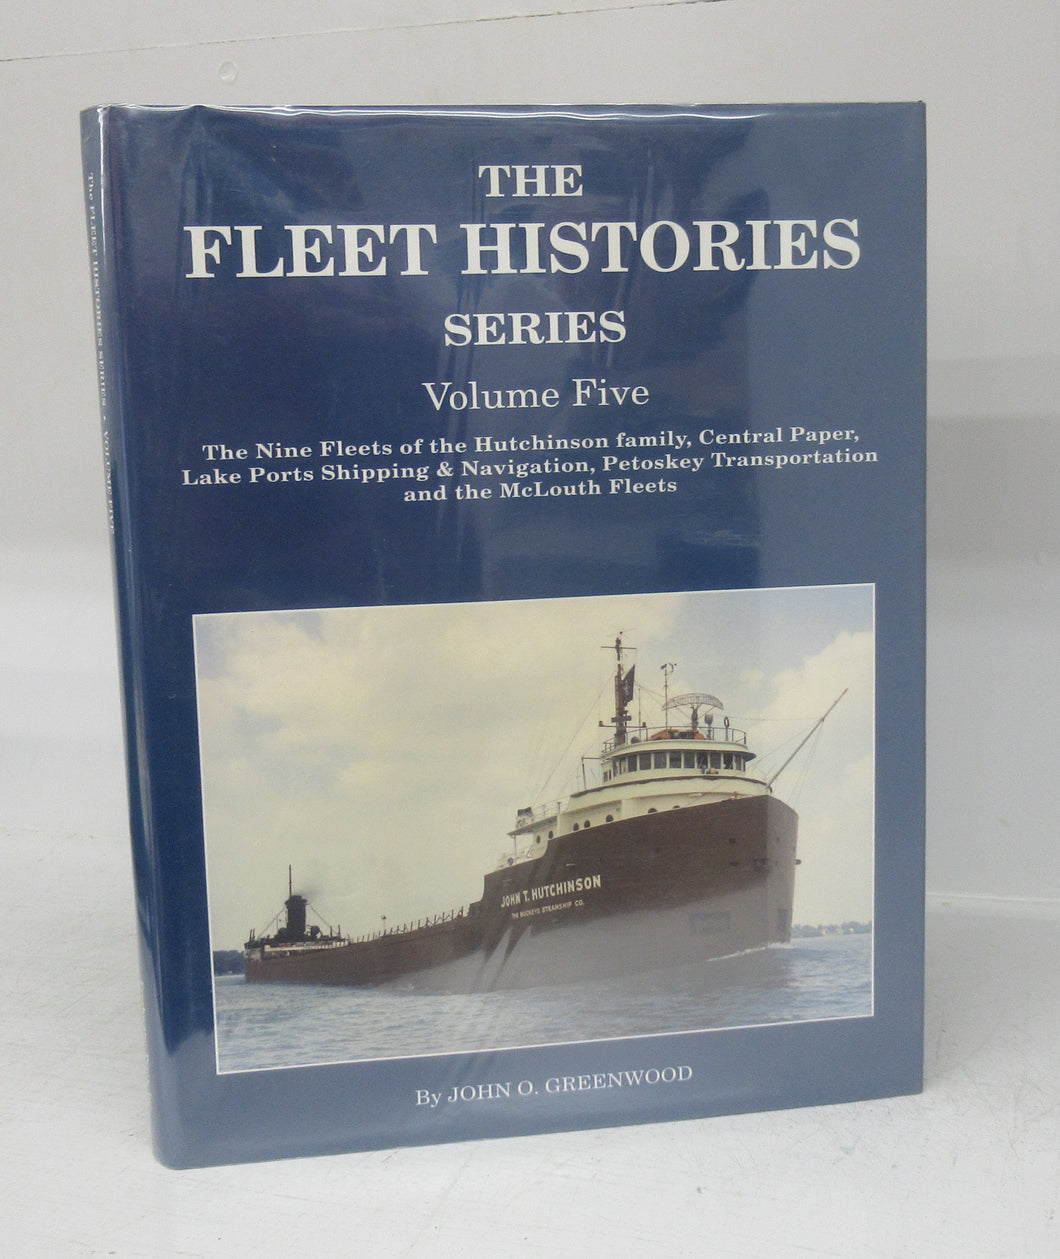 The Fleet Histories Series Volume Five: The Nine Fleets of the Hutchinson Family, Central Paper, Lake Ports Shipping & Navigation, Petoskey Transportation, and the two McLouth Fleets.